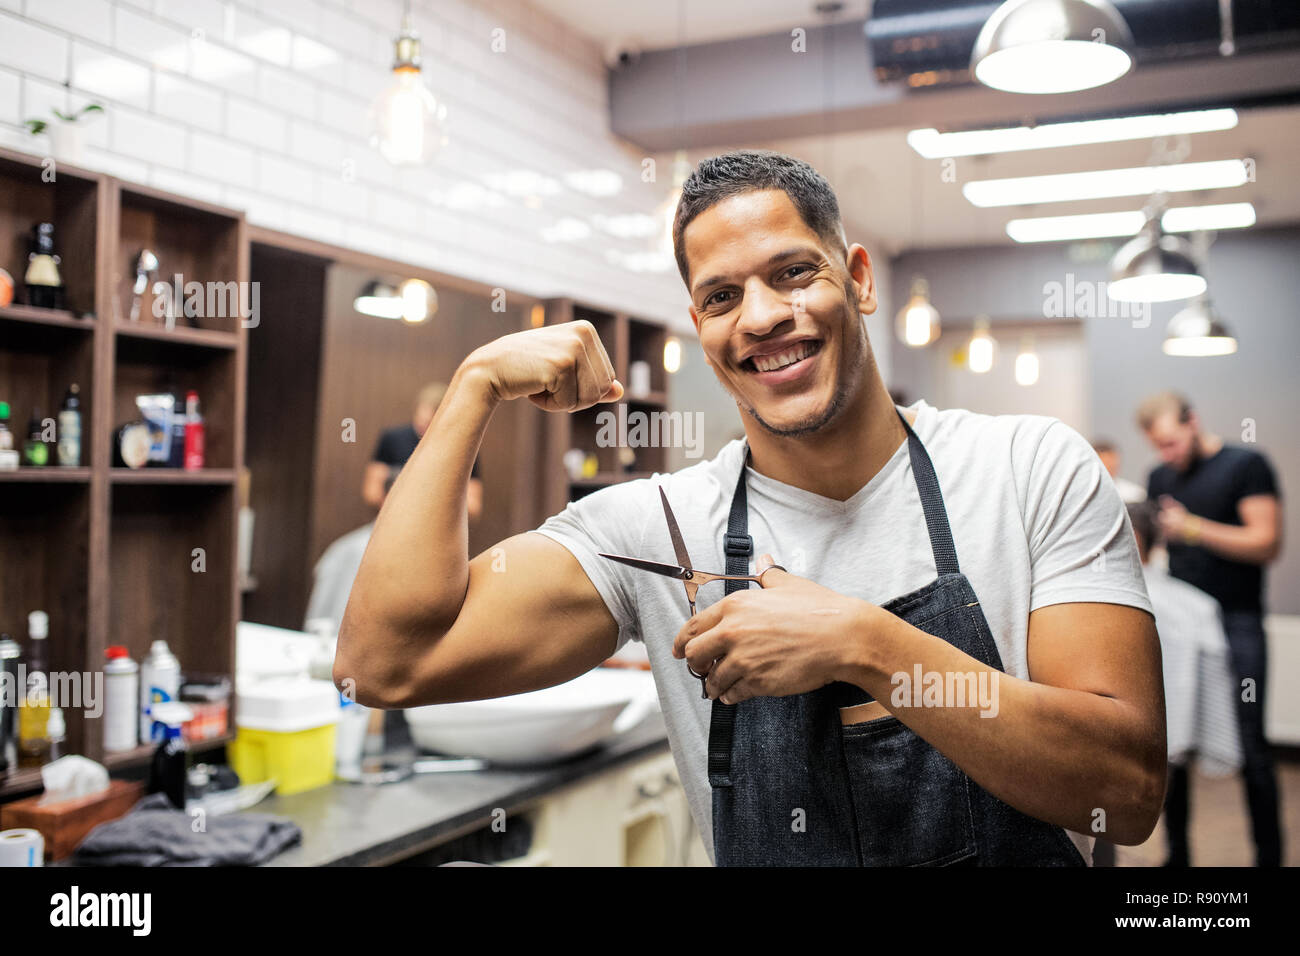 Young handsome hispanic haidresser and hairstylist standing in barber shop, flexing muscles. Stock Photo